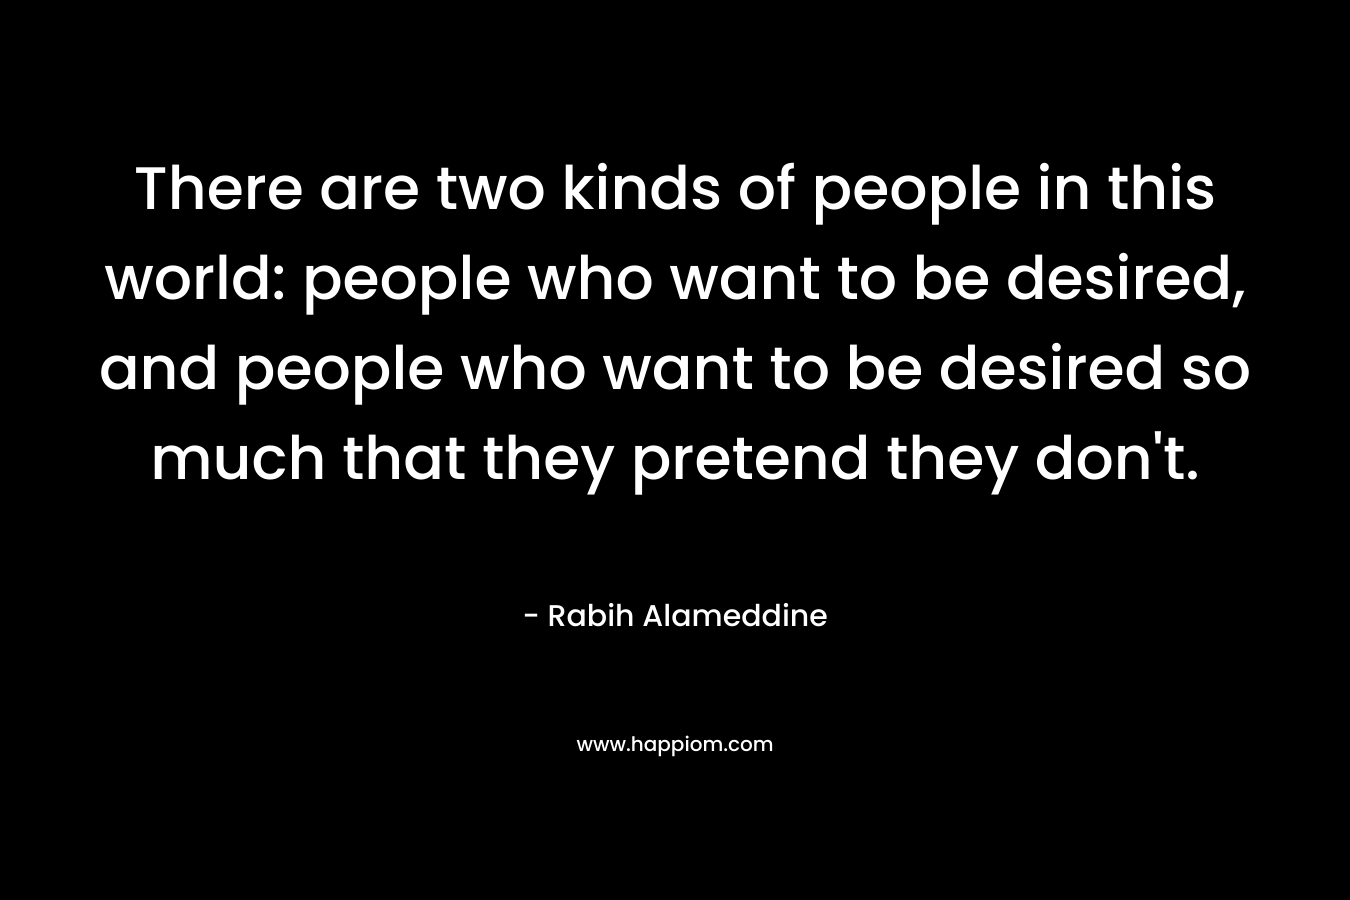 There are two kinds of people in this world: people who want to be desired, and people who want to be desired so much that they pretend they don’t. – Rabih Alameddine